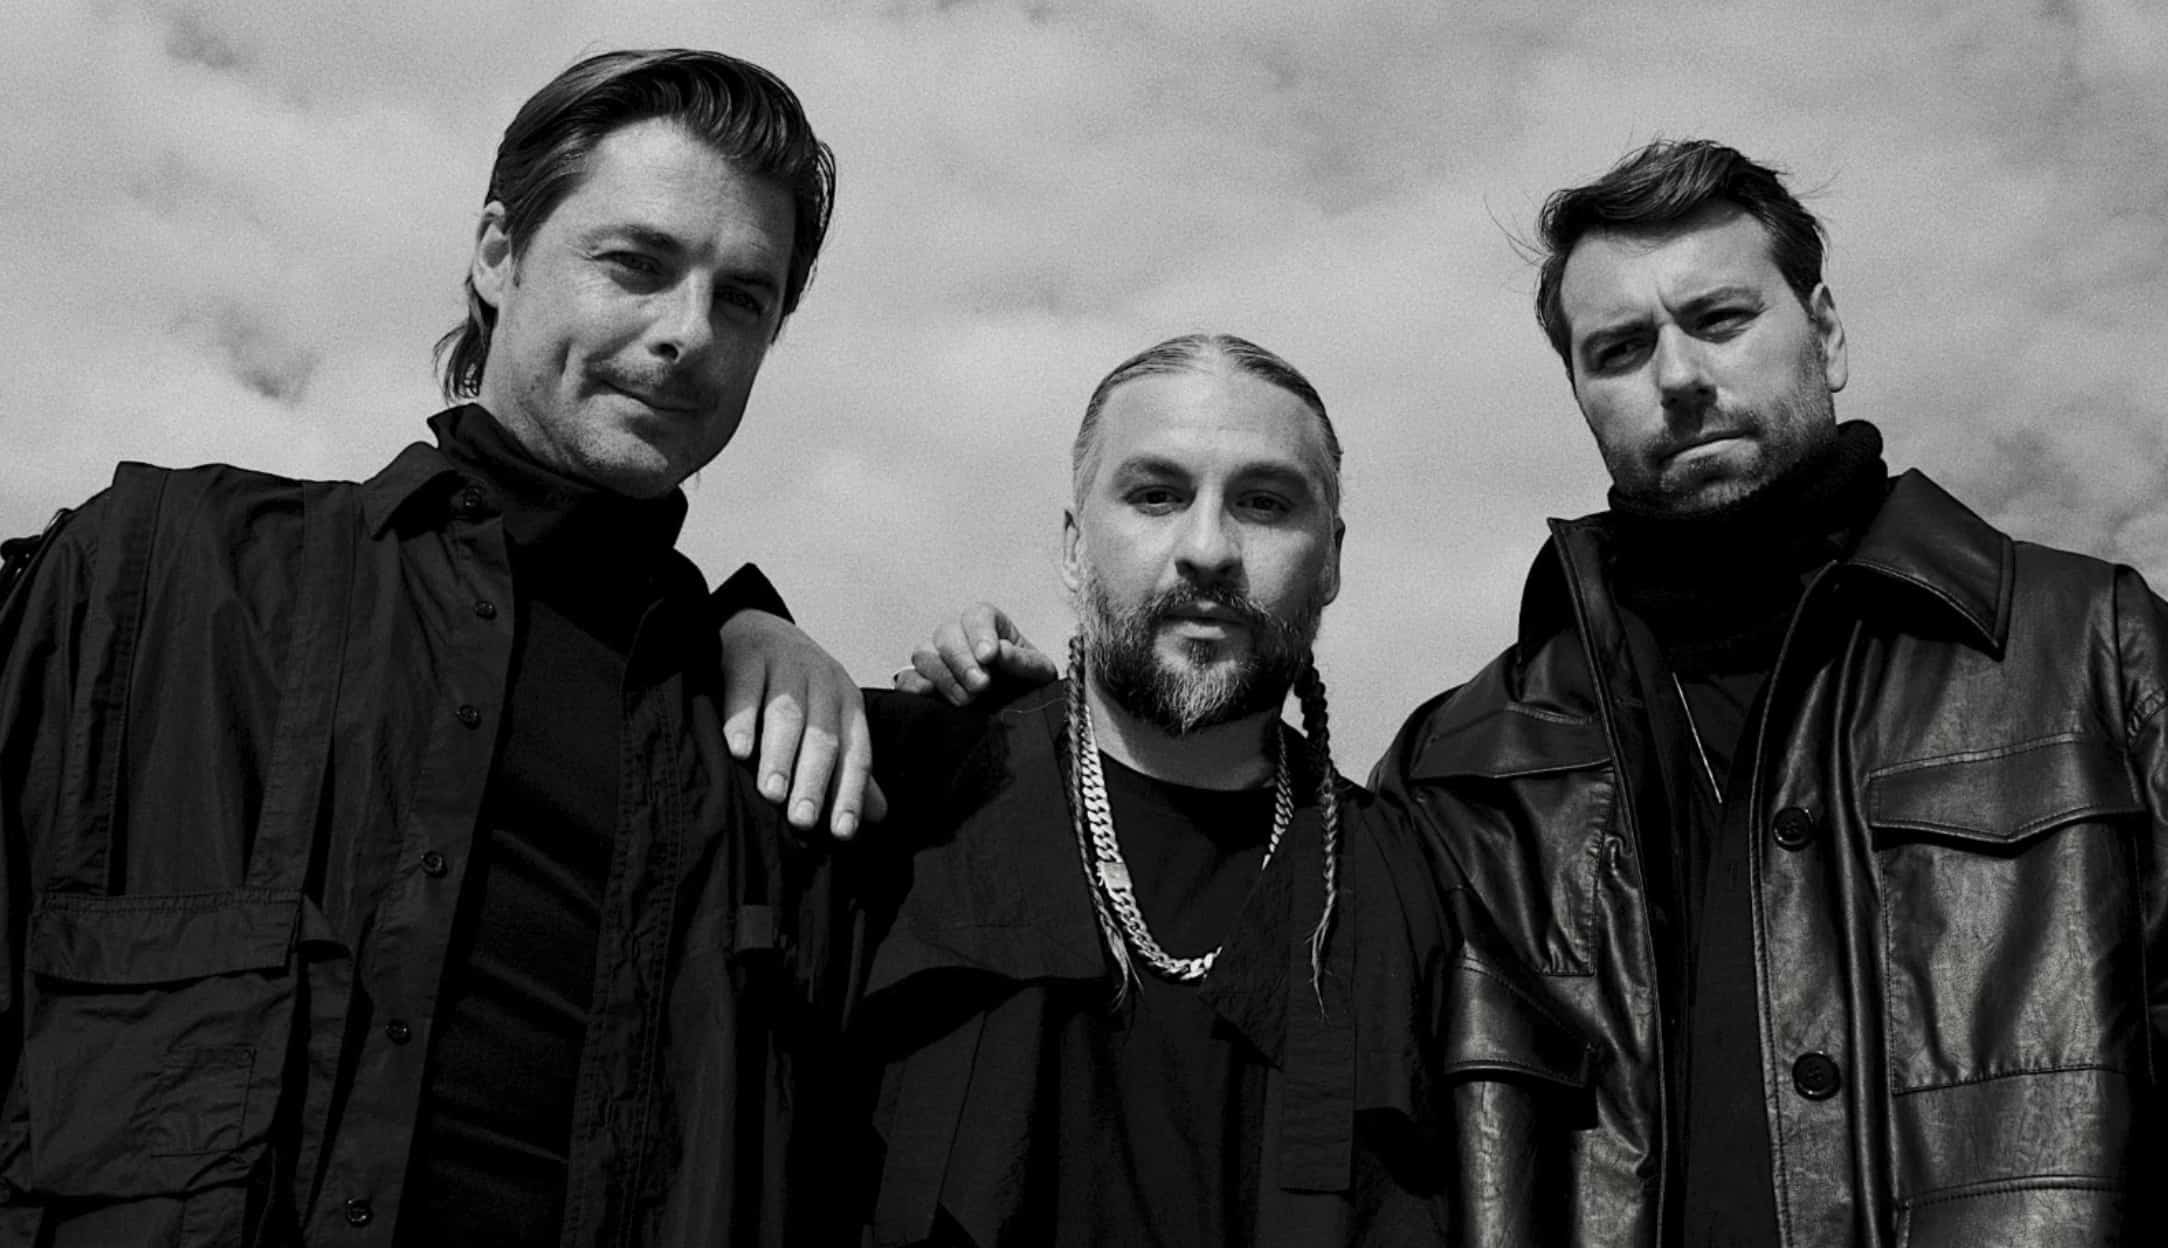 Swedish House Mafia share more details about upcoming ‘Paradise Again’ album on Discord Q&A